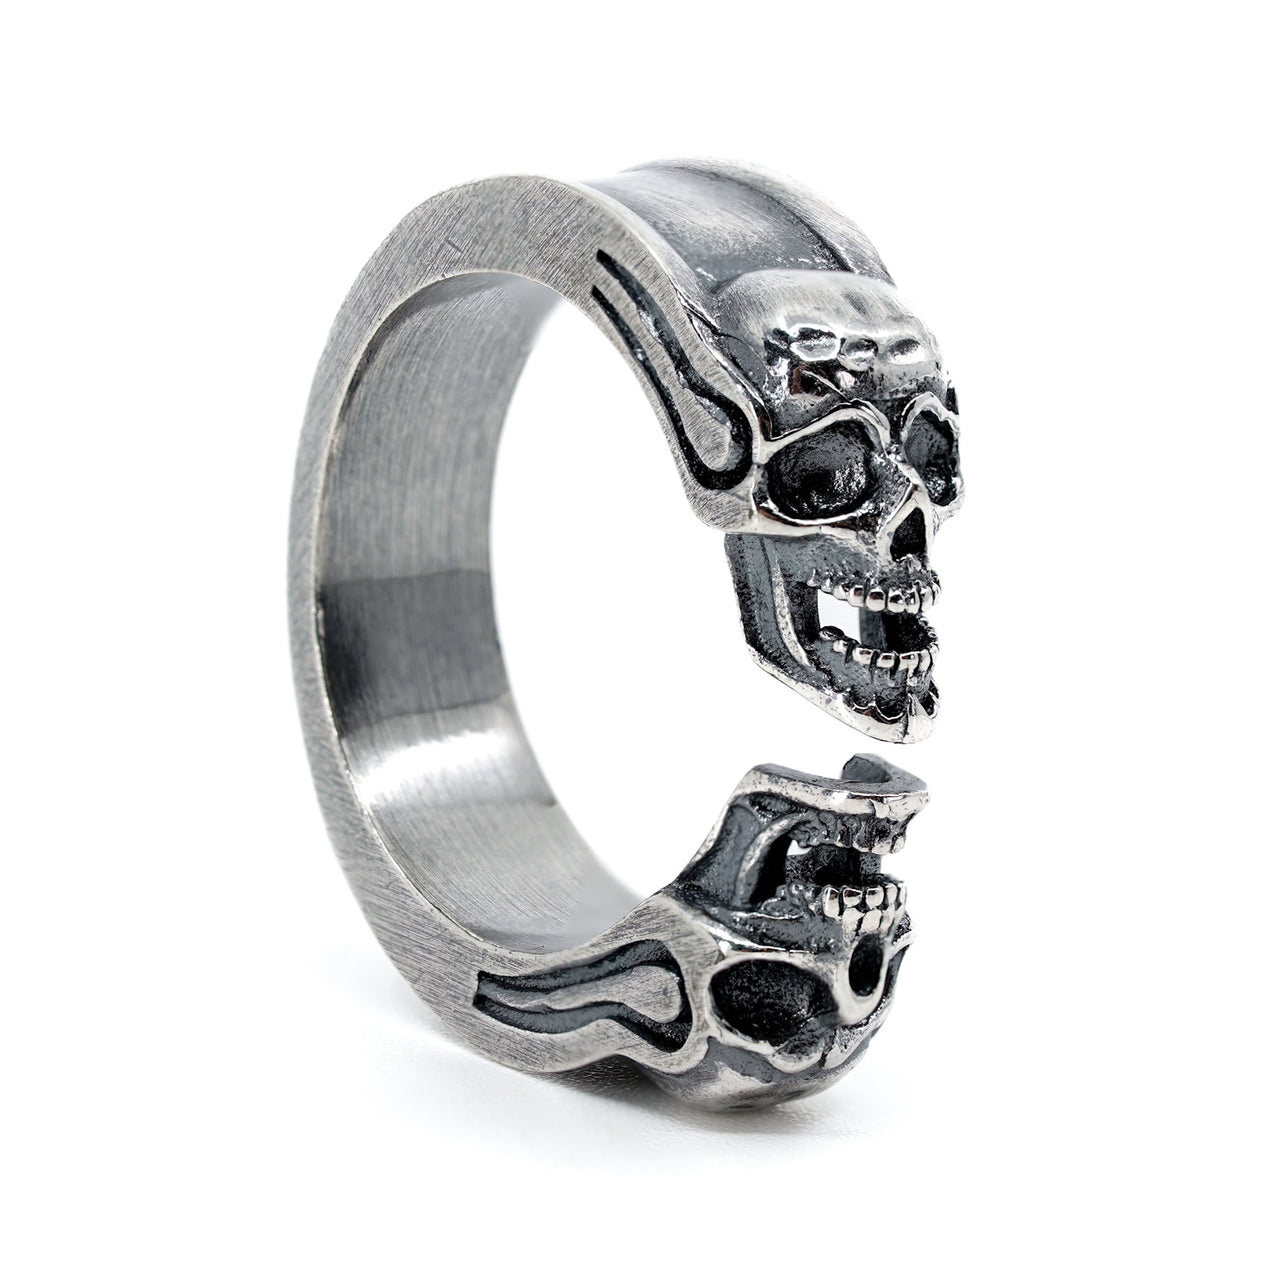 Gothic Skull ring in 925 Sterling Silver by Black Feather Design